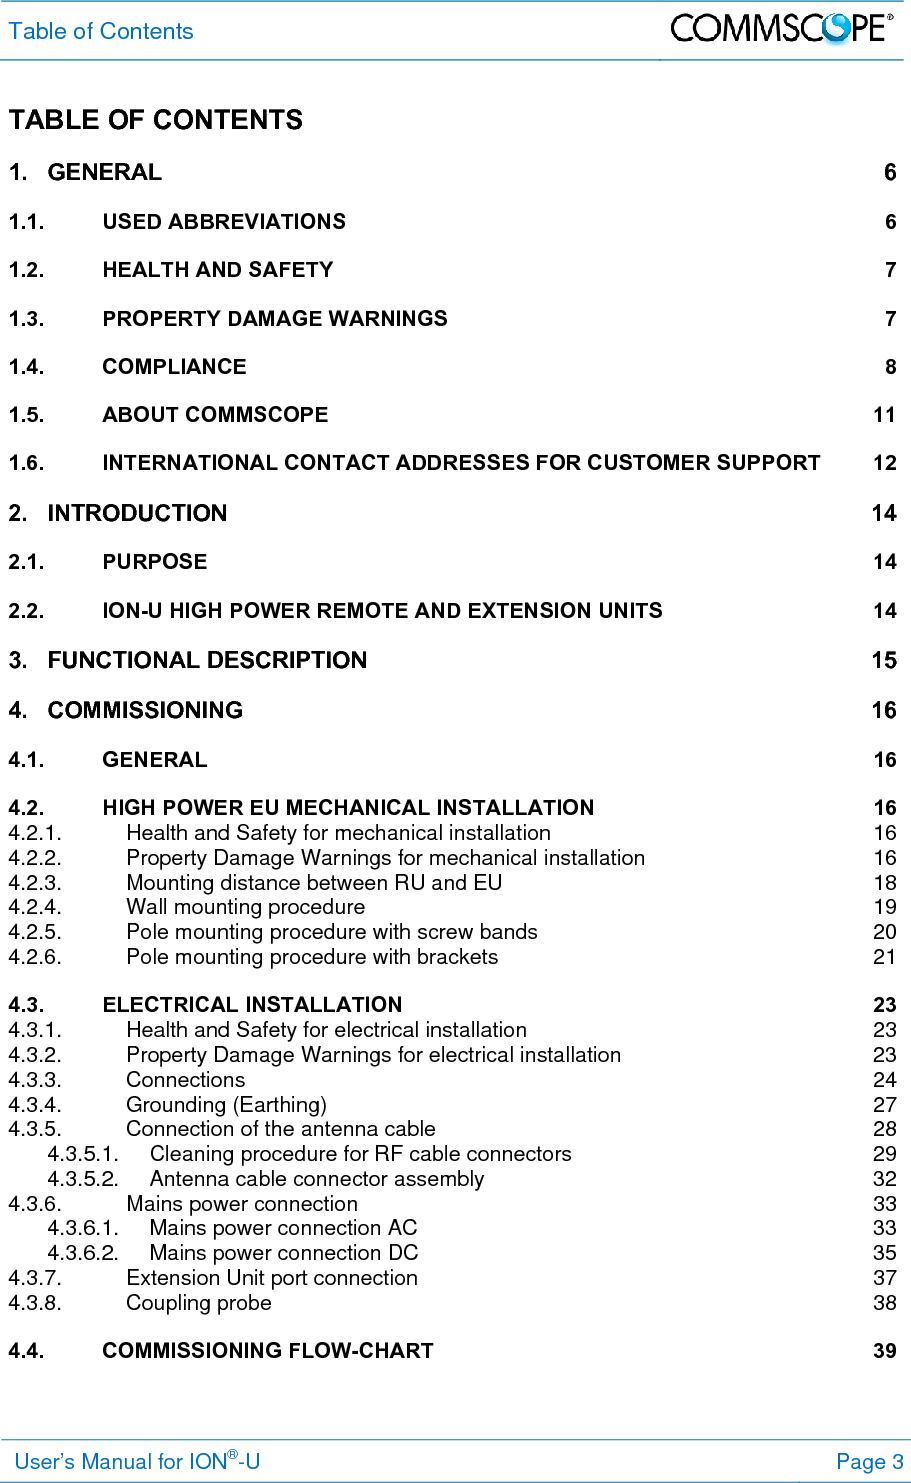 Table of Contents   User’s Manual for ION®-U Page 3 TABLE OF CONTENTS 1.GENERAL 61.1.USED ABBREVIATIONS  61.2.HEALTH AND SAFETY  71.3.PROPERTY DAMAGE WARNINGS  71.4.COMPLIANCE 81.5.ABOUT COMMSCOPE  111.6.INTERNATIONAL CONTACT ADDRESSES FOR CUSTOMER SUPPORT  122.INTRODUCTION 142.1.PURPOSE 142.2.ION-U HIGH POWER REMOTE AND EXTENSION UNITS  143.FUNCTIONAL DESCRIPTION  154.COMMISSIONING 164.1.GENERAL 164.2.HIGH POWER EU MECHANICAL INSTALLATION  164.2.1.Health and Safety for mechanical installation  164.2.2.Property Damage Warnings for mechanical installation  164.2.3.Mounting distance between RU and EU  184.2.4.Wall mounting procedure  194.2.5.Pole mounting procedure with screw bands  204.2.6.Pole mounting procedure with brackets  214.3.ELECTRICAL INSTALLATION  234.3.1.Health and Safety for electrical installation  234.3.2.Property Damage Warnings for electrical installation  234.3.3.Connections 244.3.4.Grounding (Earthing)  274.3.5.Connection of the antenna cable  284.3.5.1.Cleaning procedure for RF cable connectors  294.3.5.2.Antenna cable connector assembly  324.3.6.Mains power connection  334.3.6.1.Mains power connection AC  334.3.6.2.Mains power connection DC  354.3.7.Extension Unit port connection  374.3.8.Coupling probe  384.4.COMMISSIONING FLOW-CHART  39 